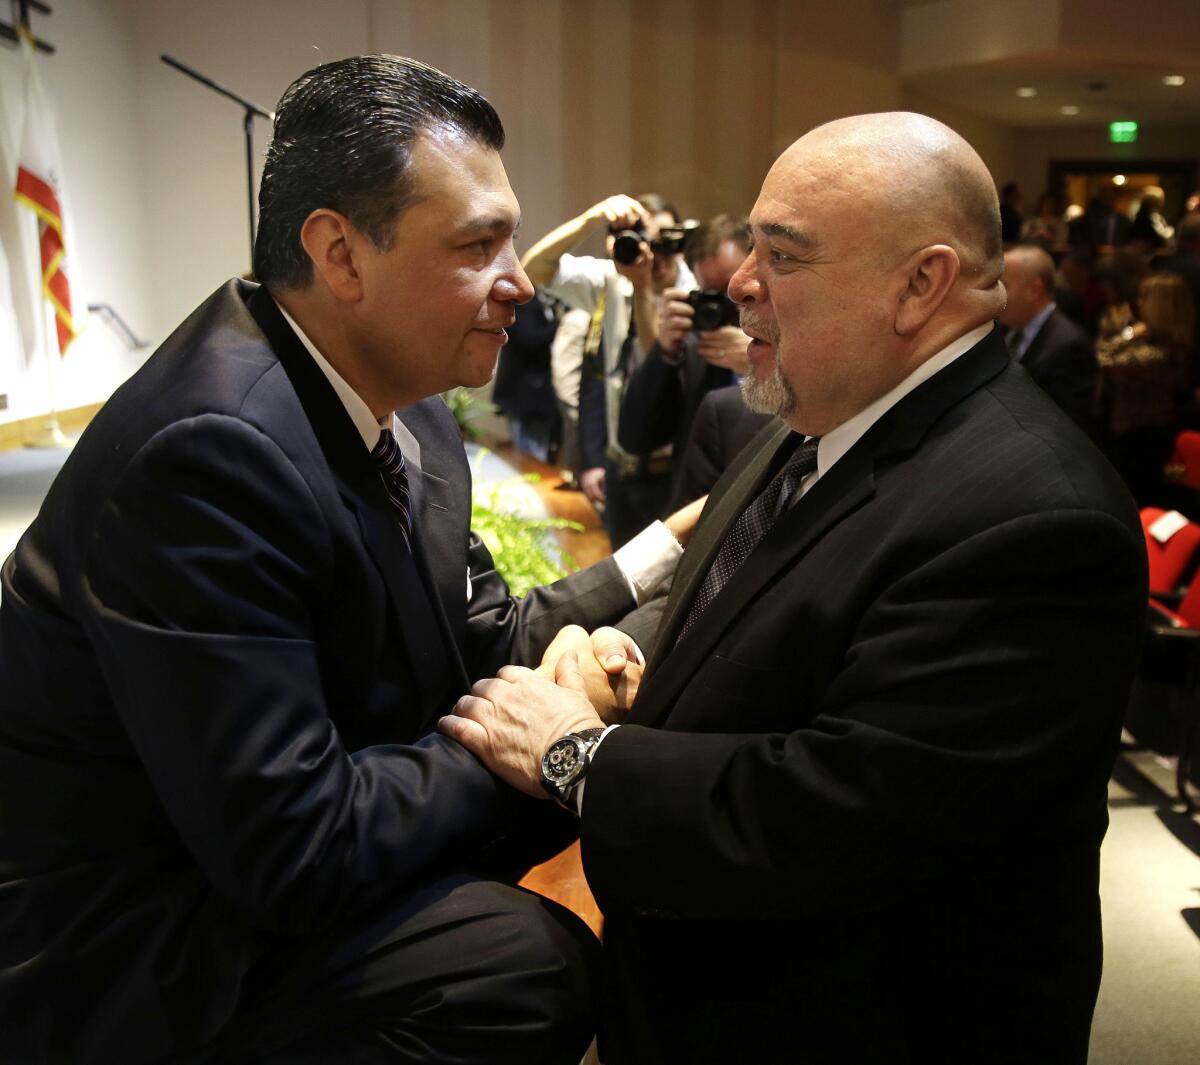 Alex Padilla, left, is congratulated by former Lt. Gov. Cruz Bustamante after he was sworn in as secretary of state in Sacramento last month.